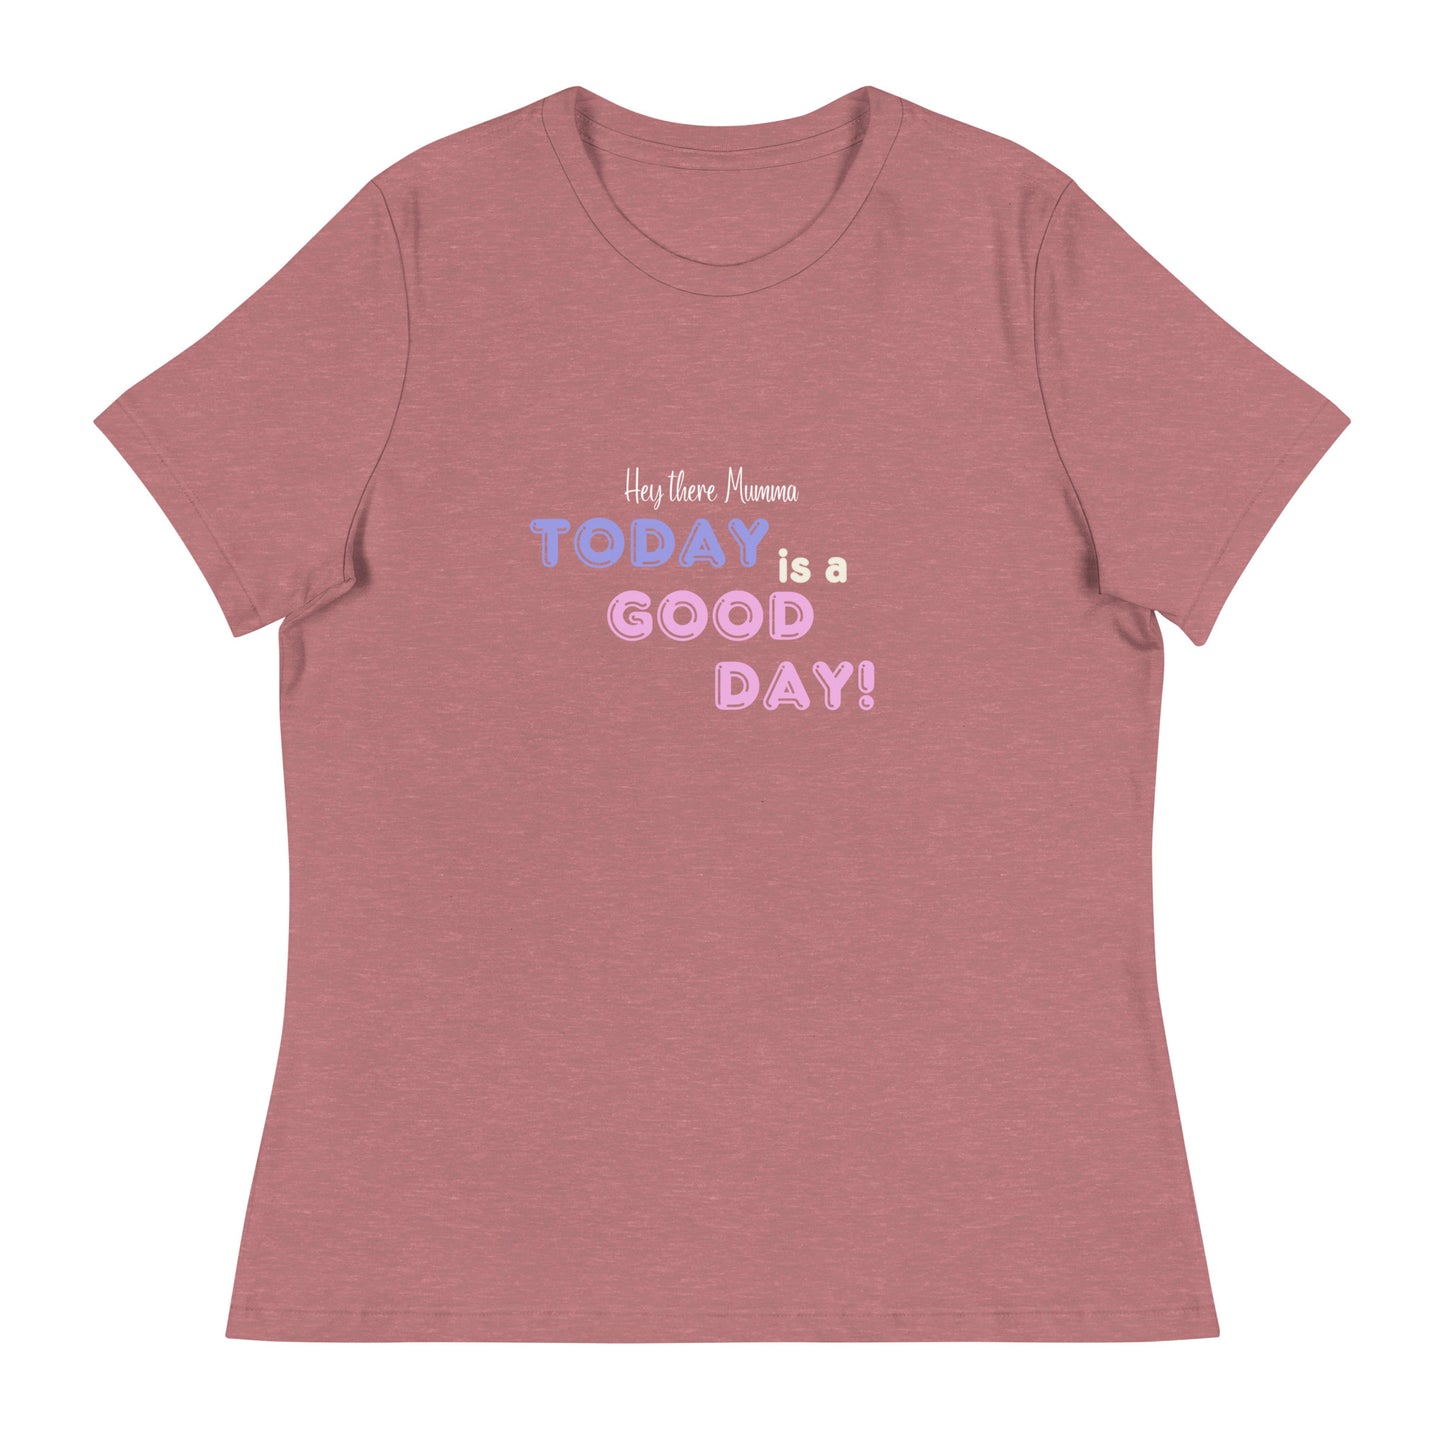 Today is a good day! T-shirt